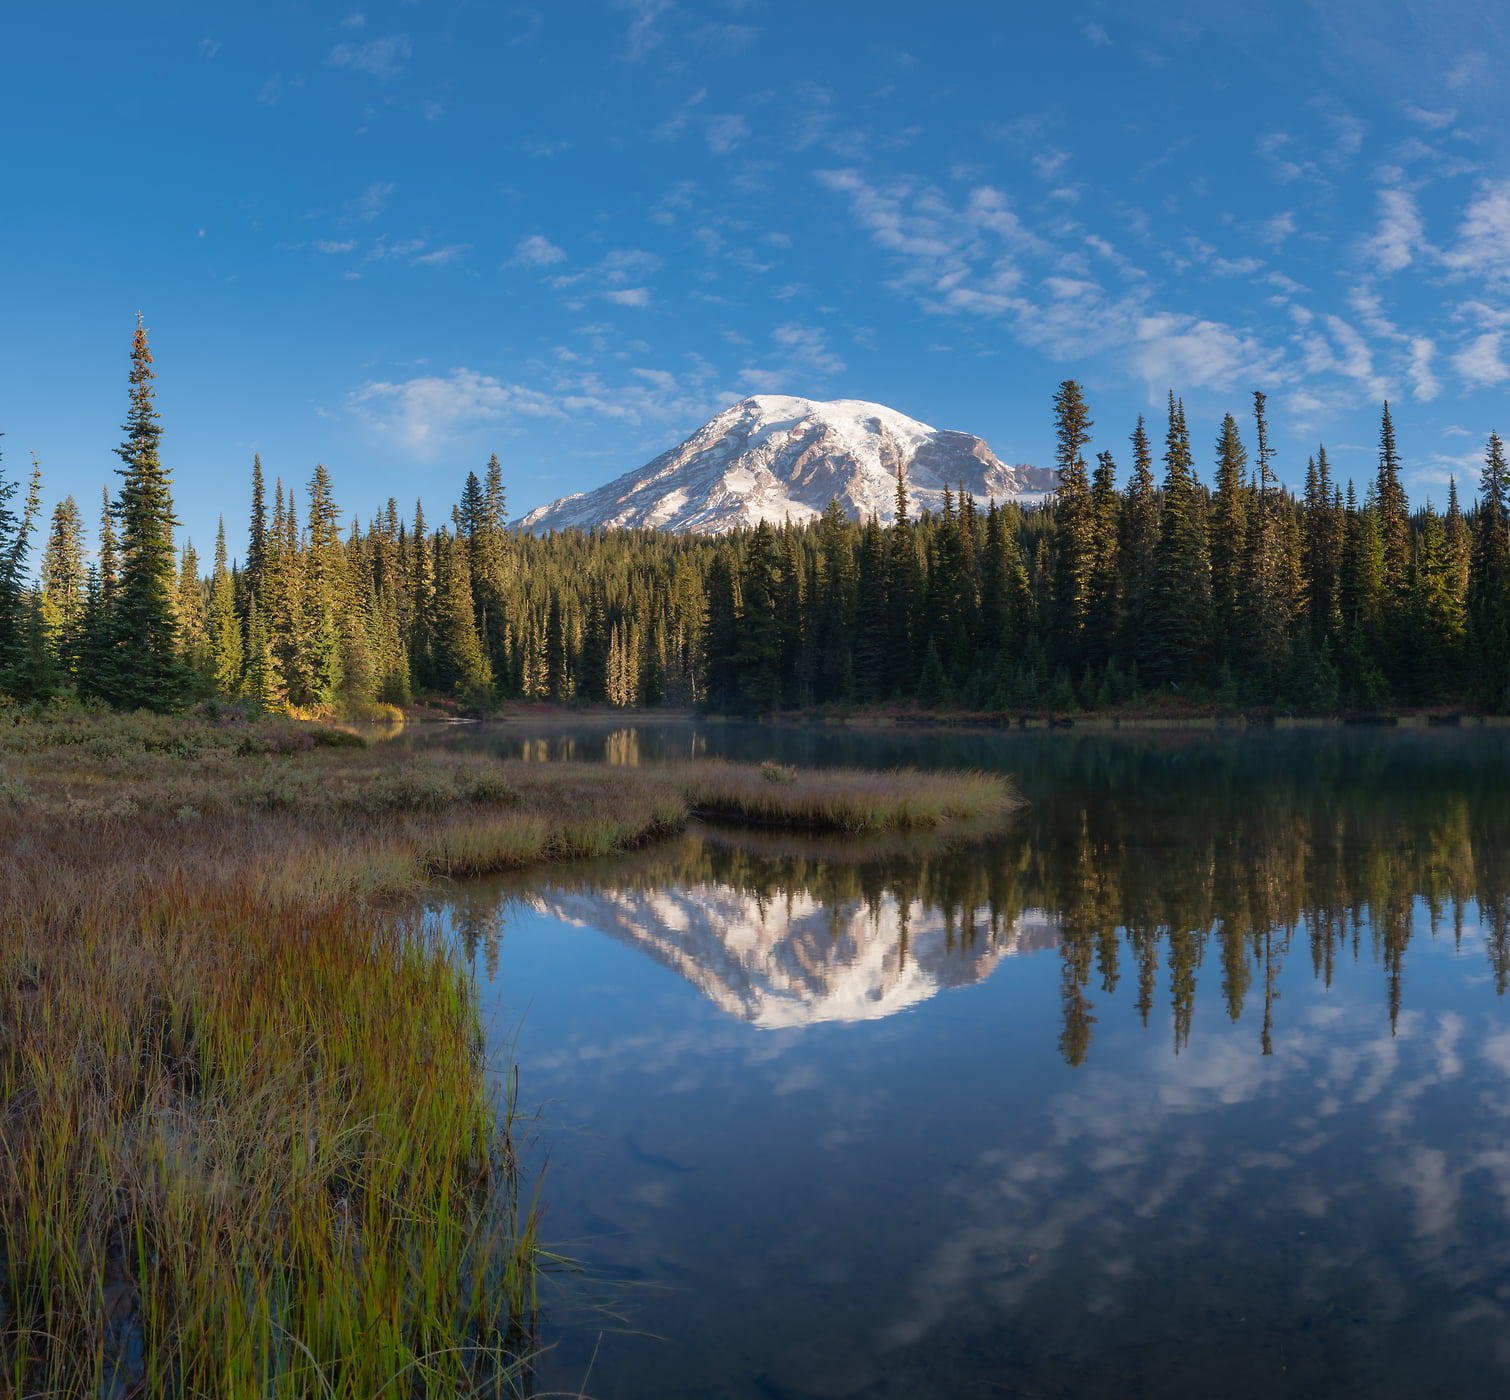 229 megapixels! A very high resolution, large-format VAST photo print of Reflection Lake in Mount Rainier National Park; photograph created by Greg Probst in Reflection Lake, Mount Rainier National Park, Washington